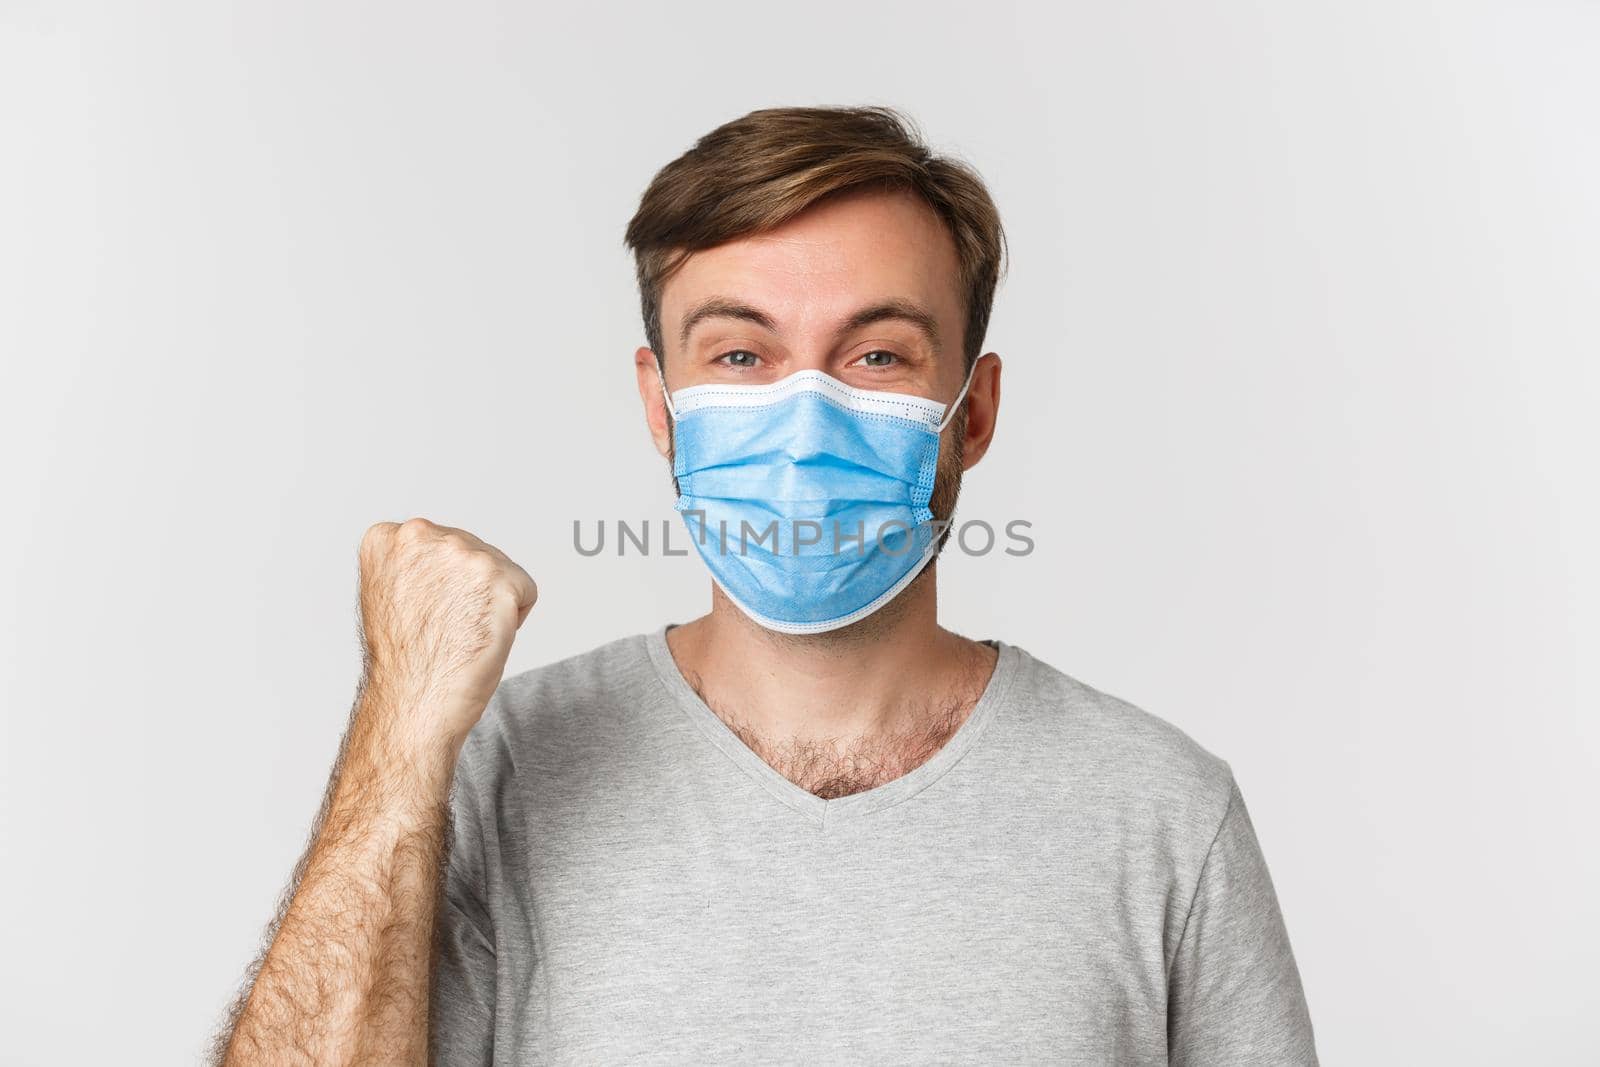 Concept of pandemic, coronavirus and social-distancing. Cheerful caucasian man in gray t-shirt and medical mask, rejoicing from win, standing over white background.